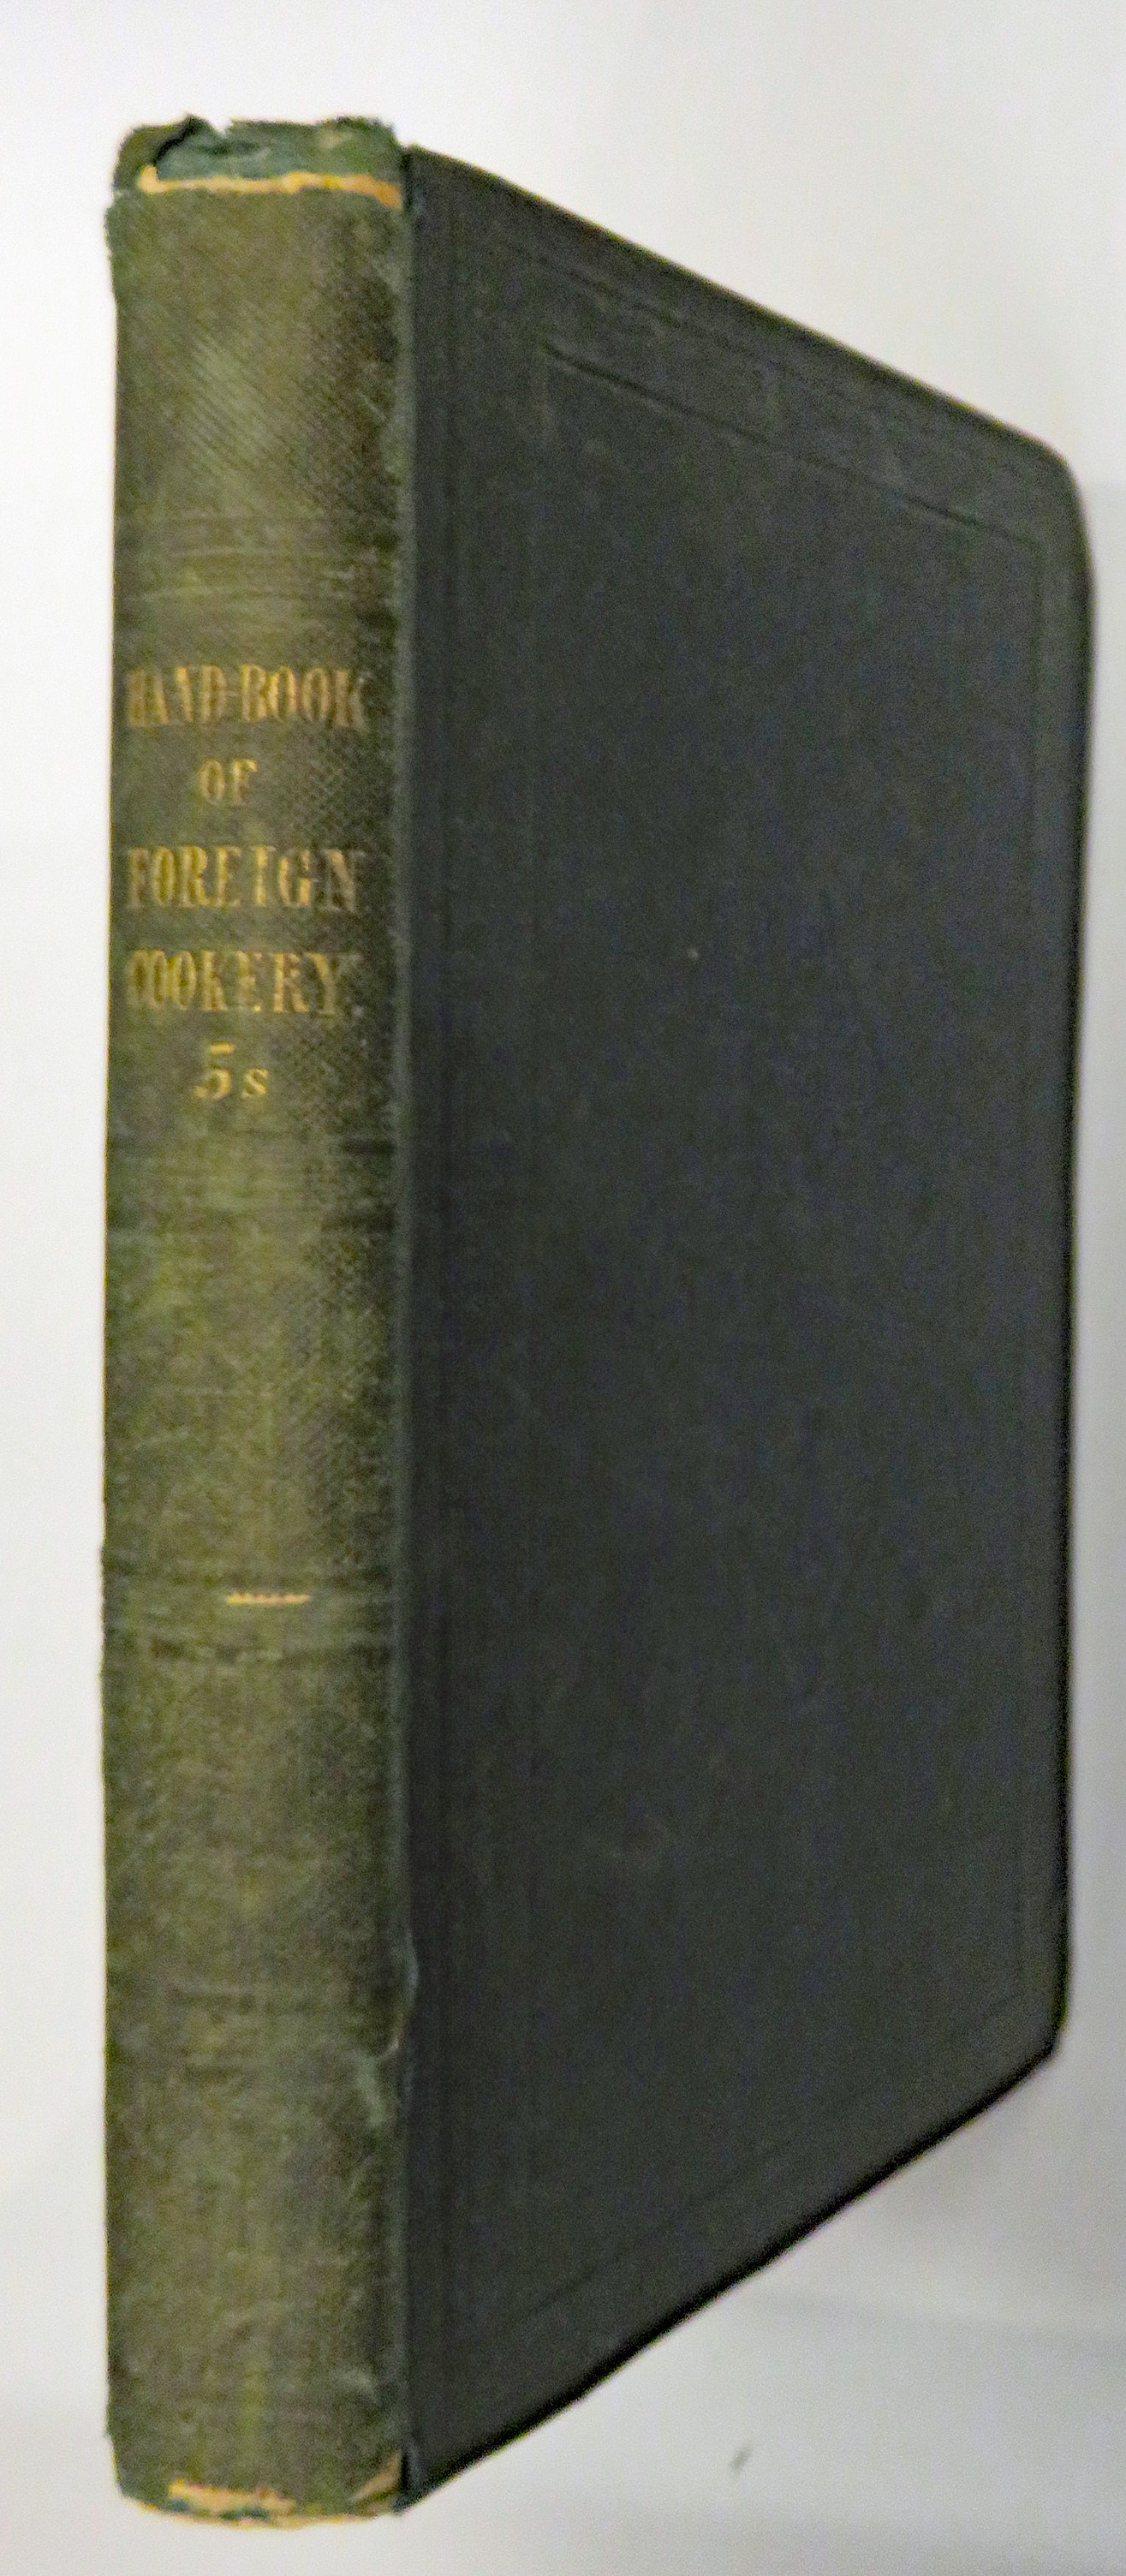 A Handbook of Foreign Cookery; Principally French, German and Danish: Invented As A Supplement To All English Cookery Books